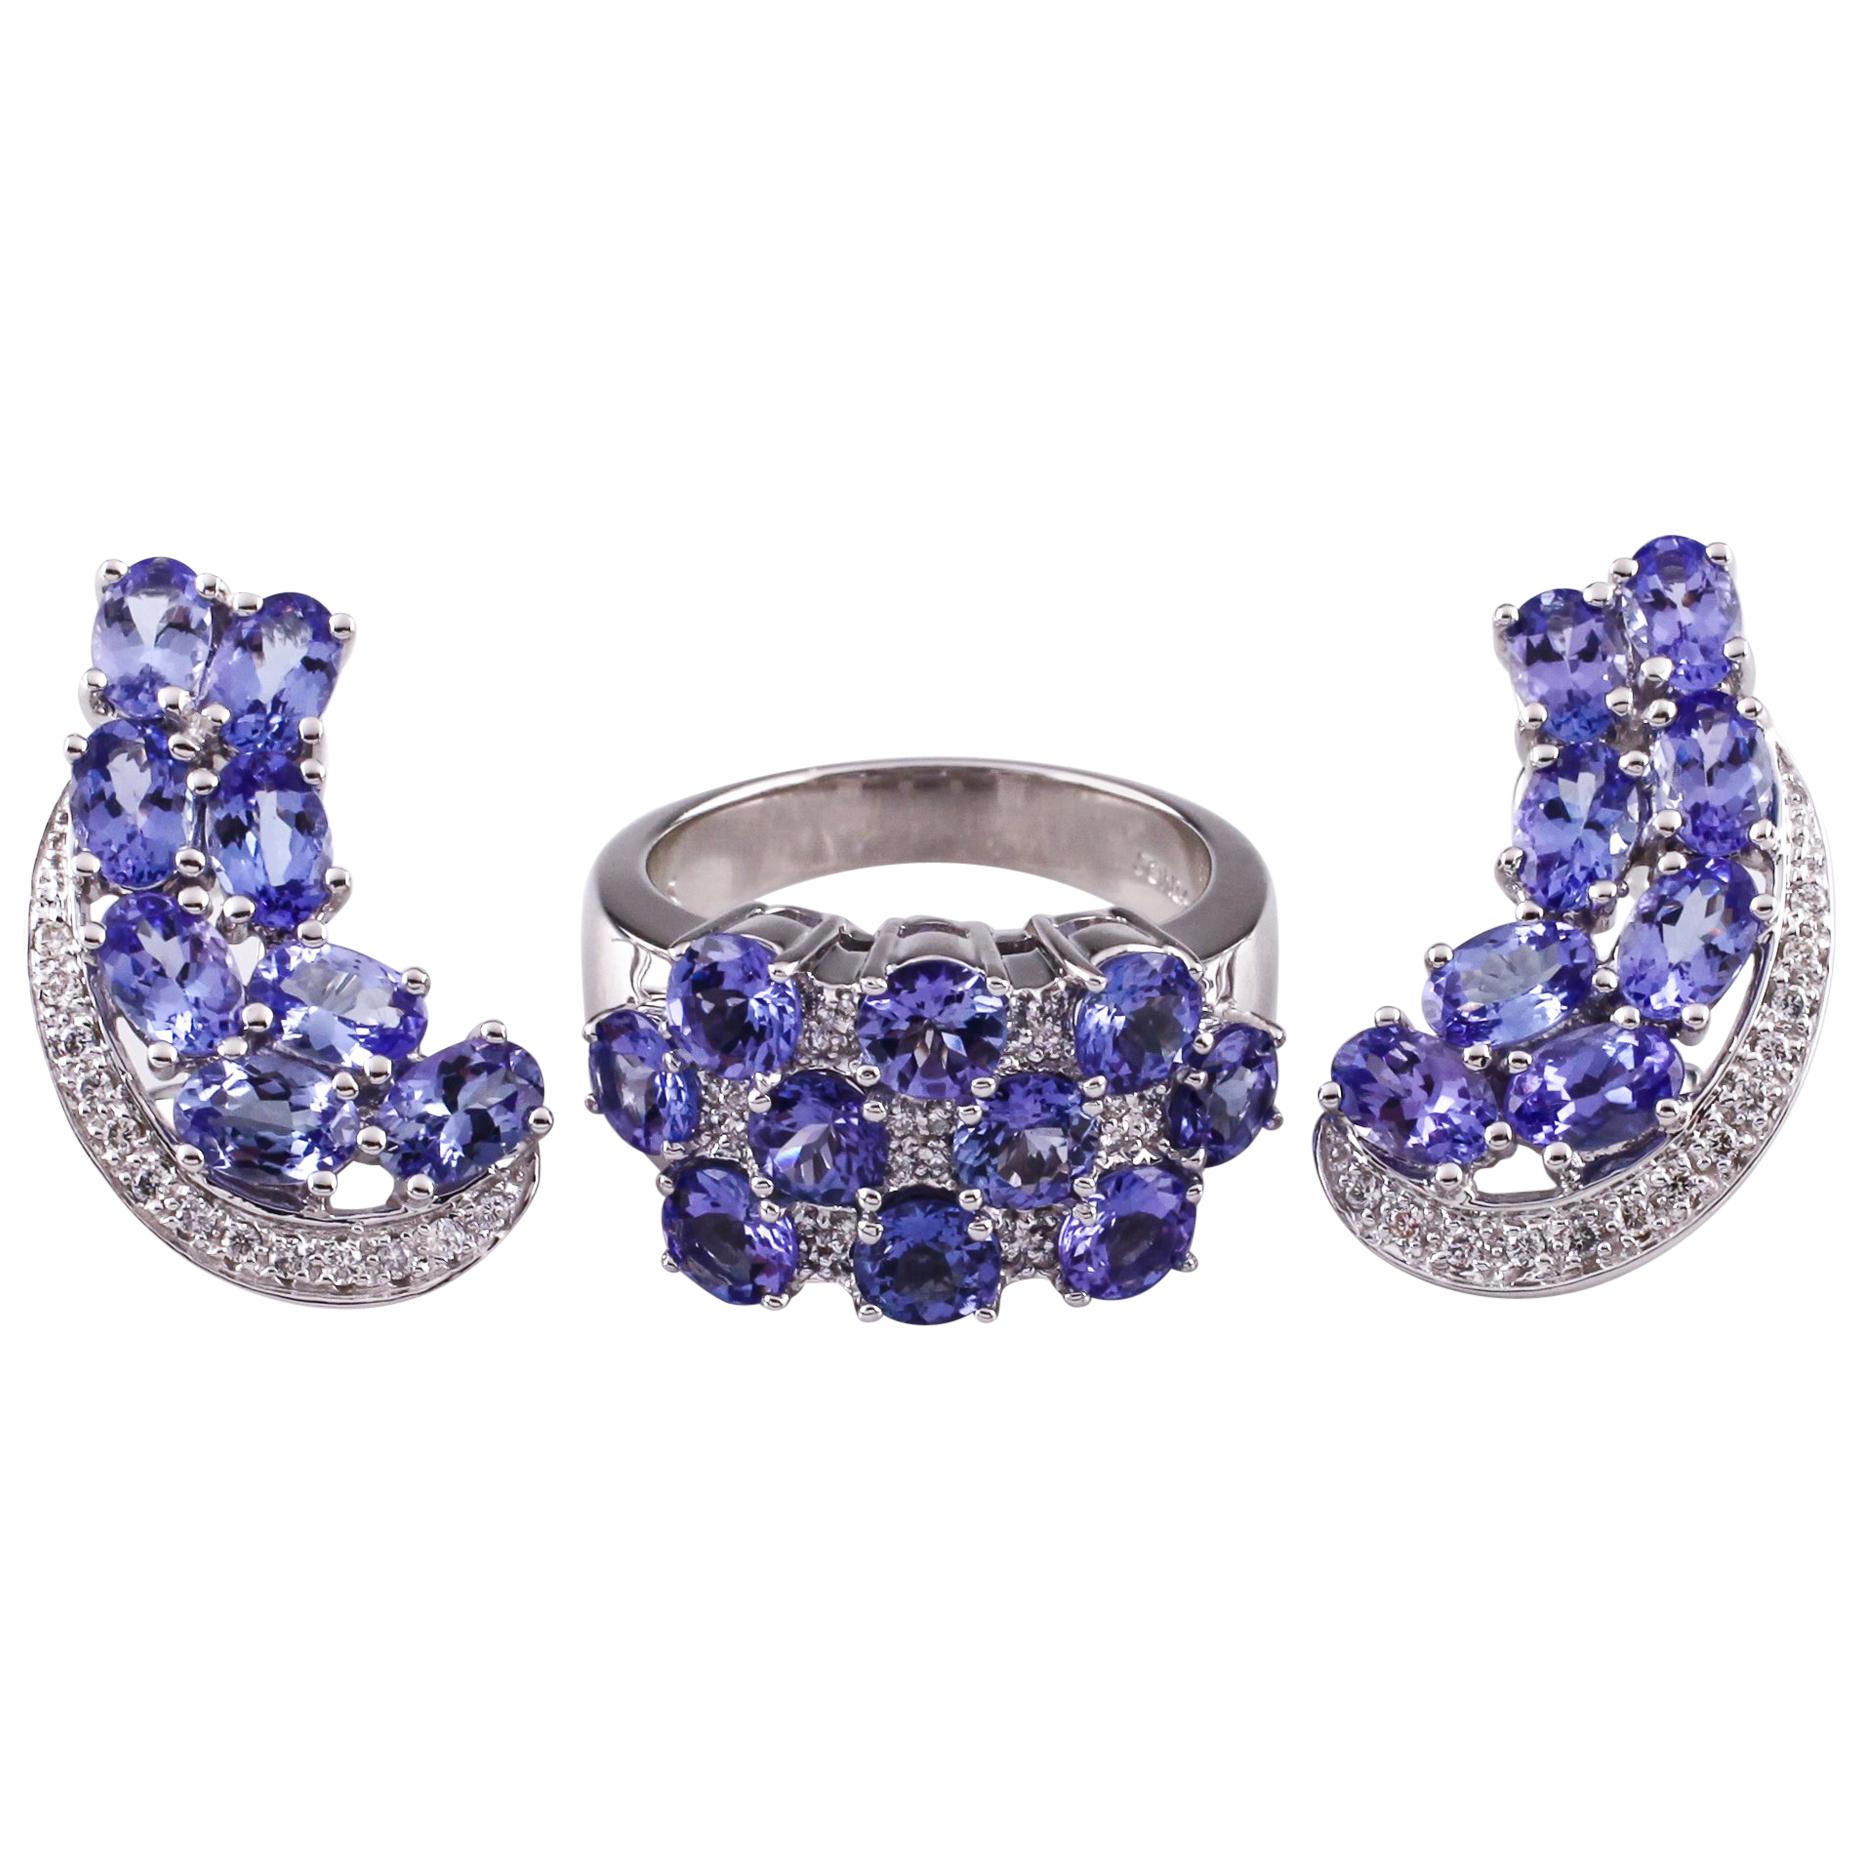 10.60 Carat Iolite and Diamond 14 Karat White Gold Earring and Ring Jewelry Set